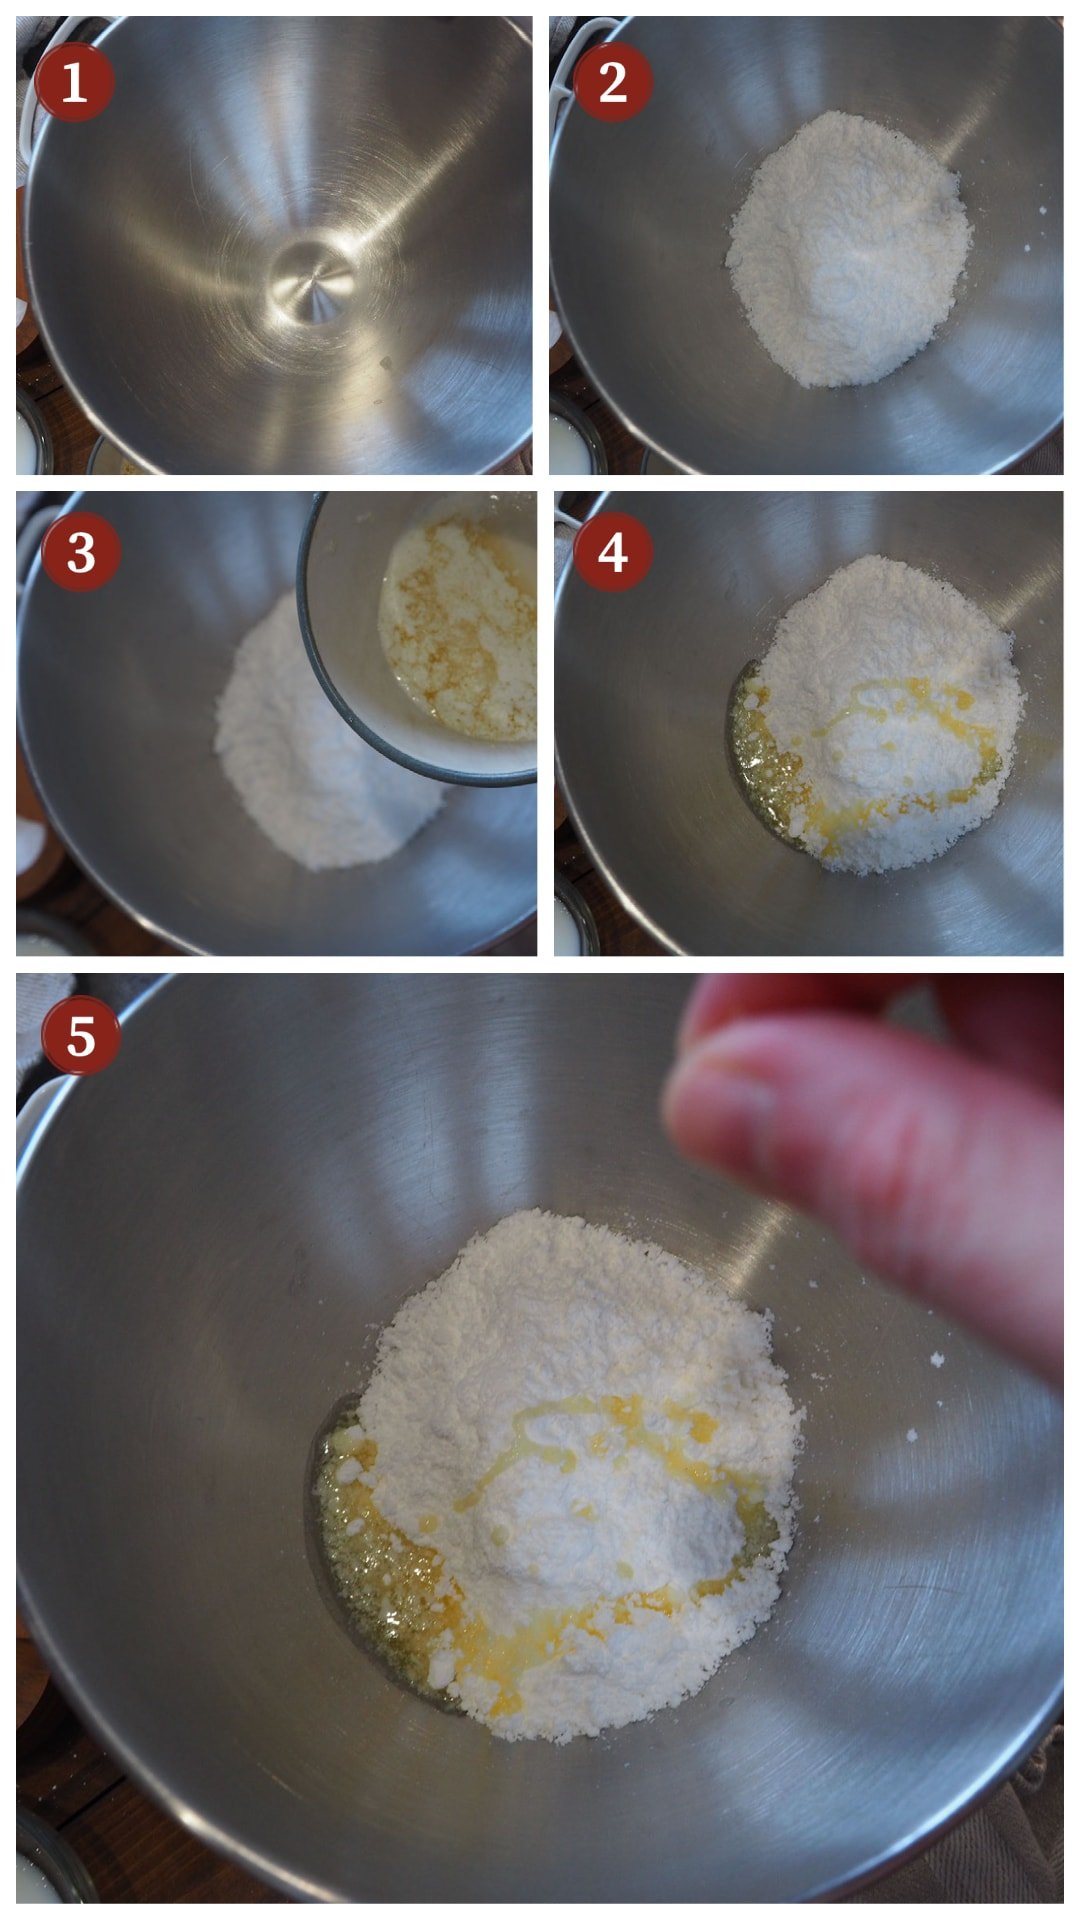 A collage on images showing the steps to add ingredients to make homemade peanut butter cups, steps 1 - 5.